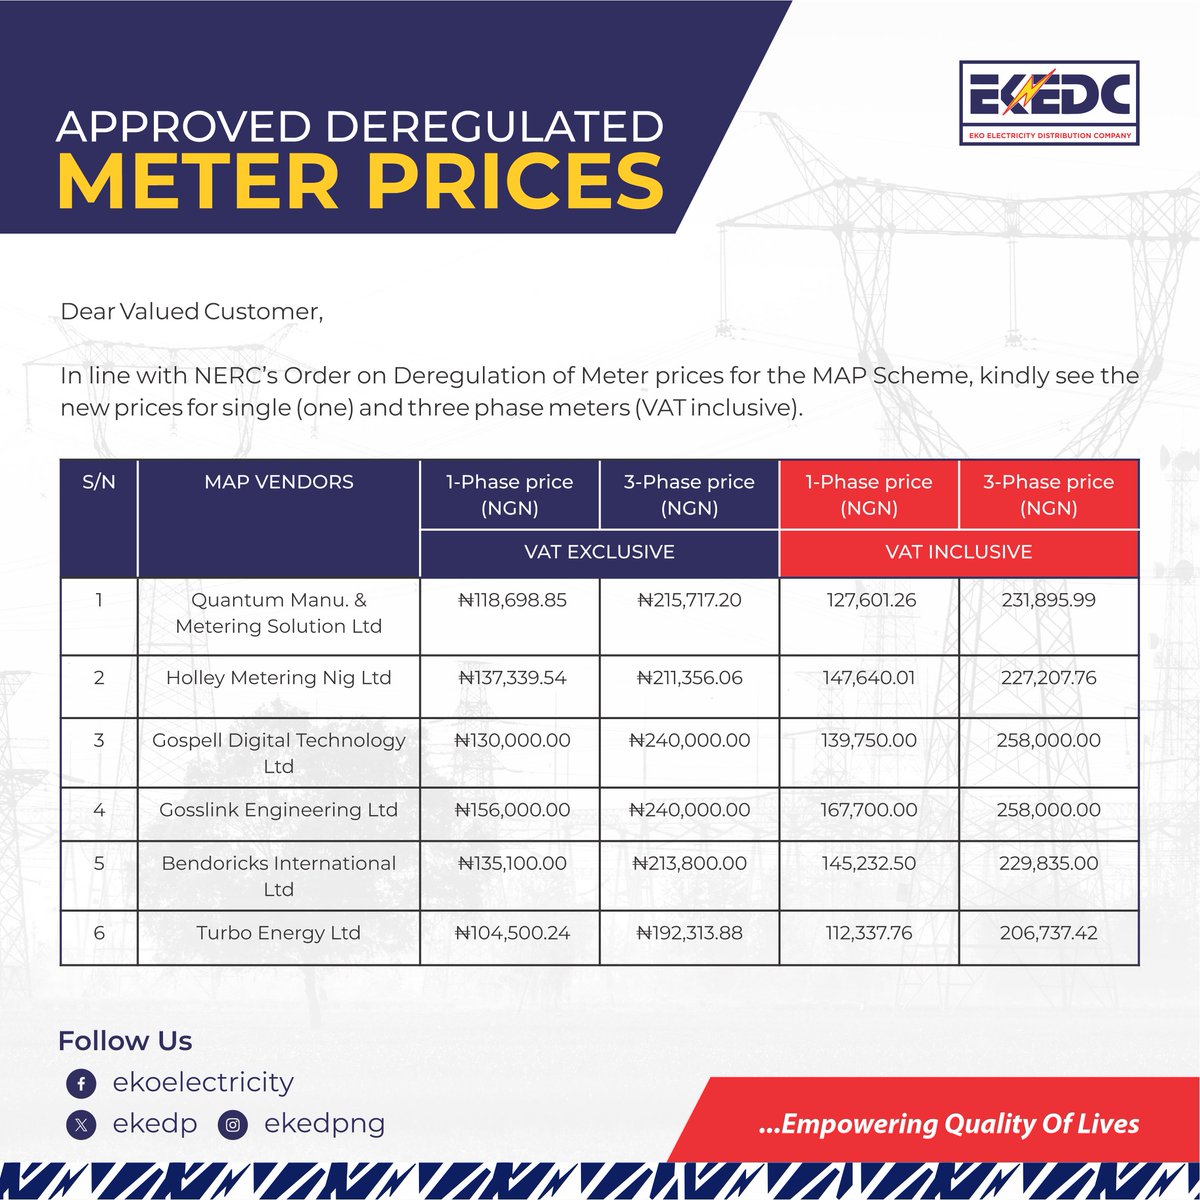 APPROVED DEREGULATED METER PRICES